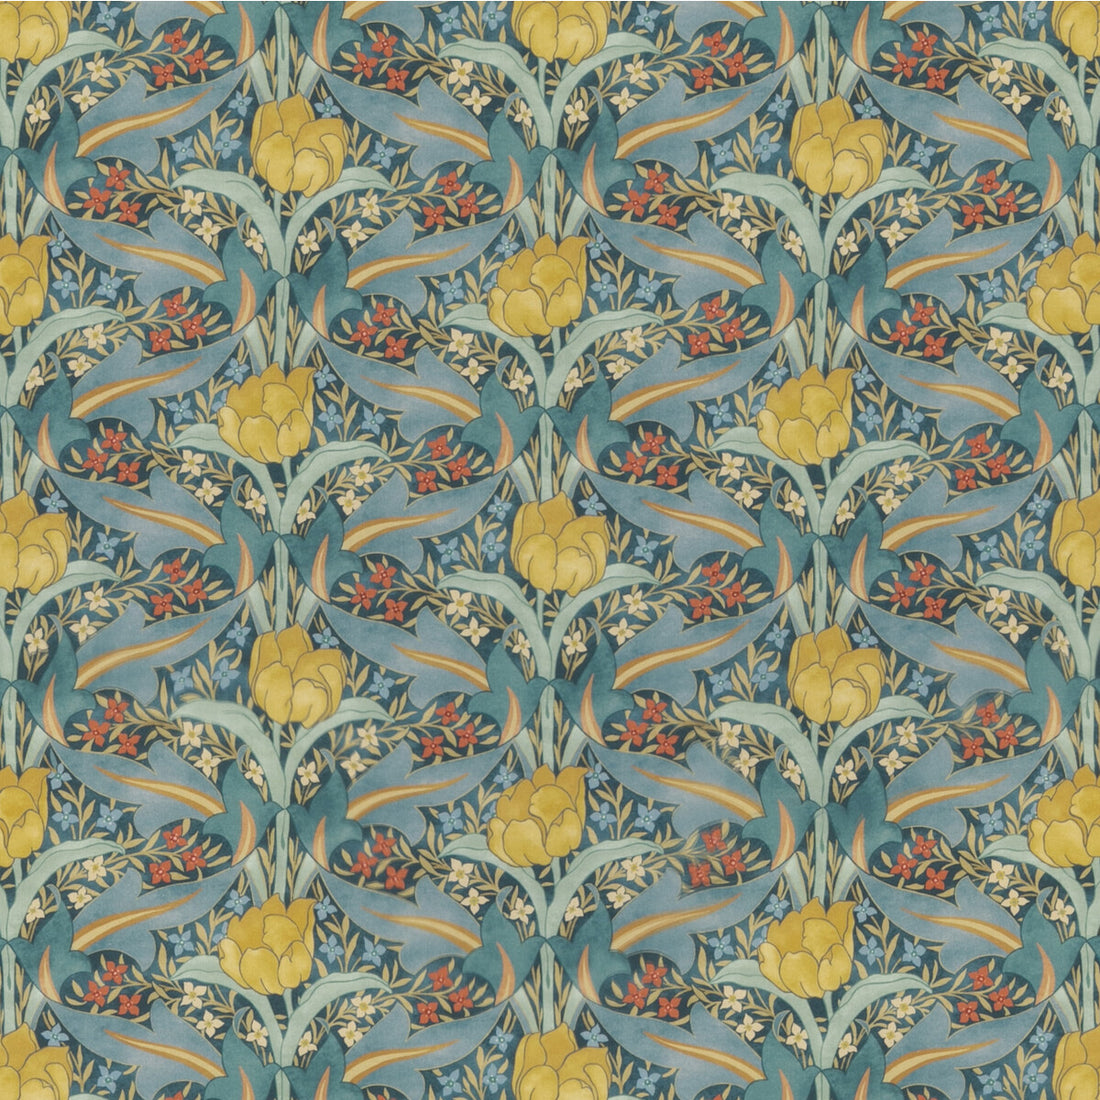 Tulip &amp; Jasmine Cotton fabric in teal color - pattern BP10977.3.0 - by G P &amp; J Baker in the Original Brantwood Fabric collection